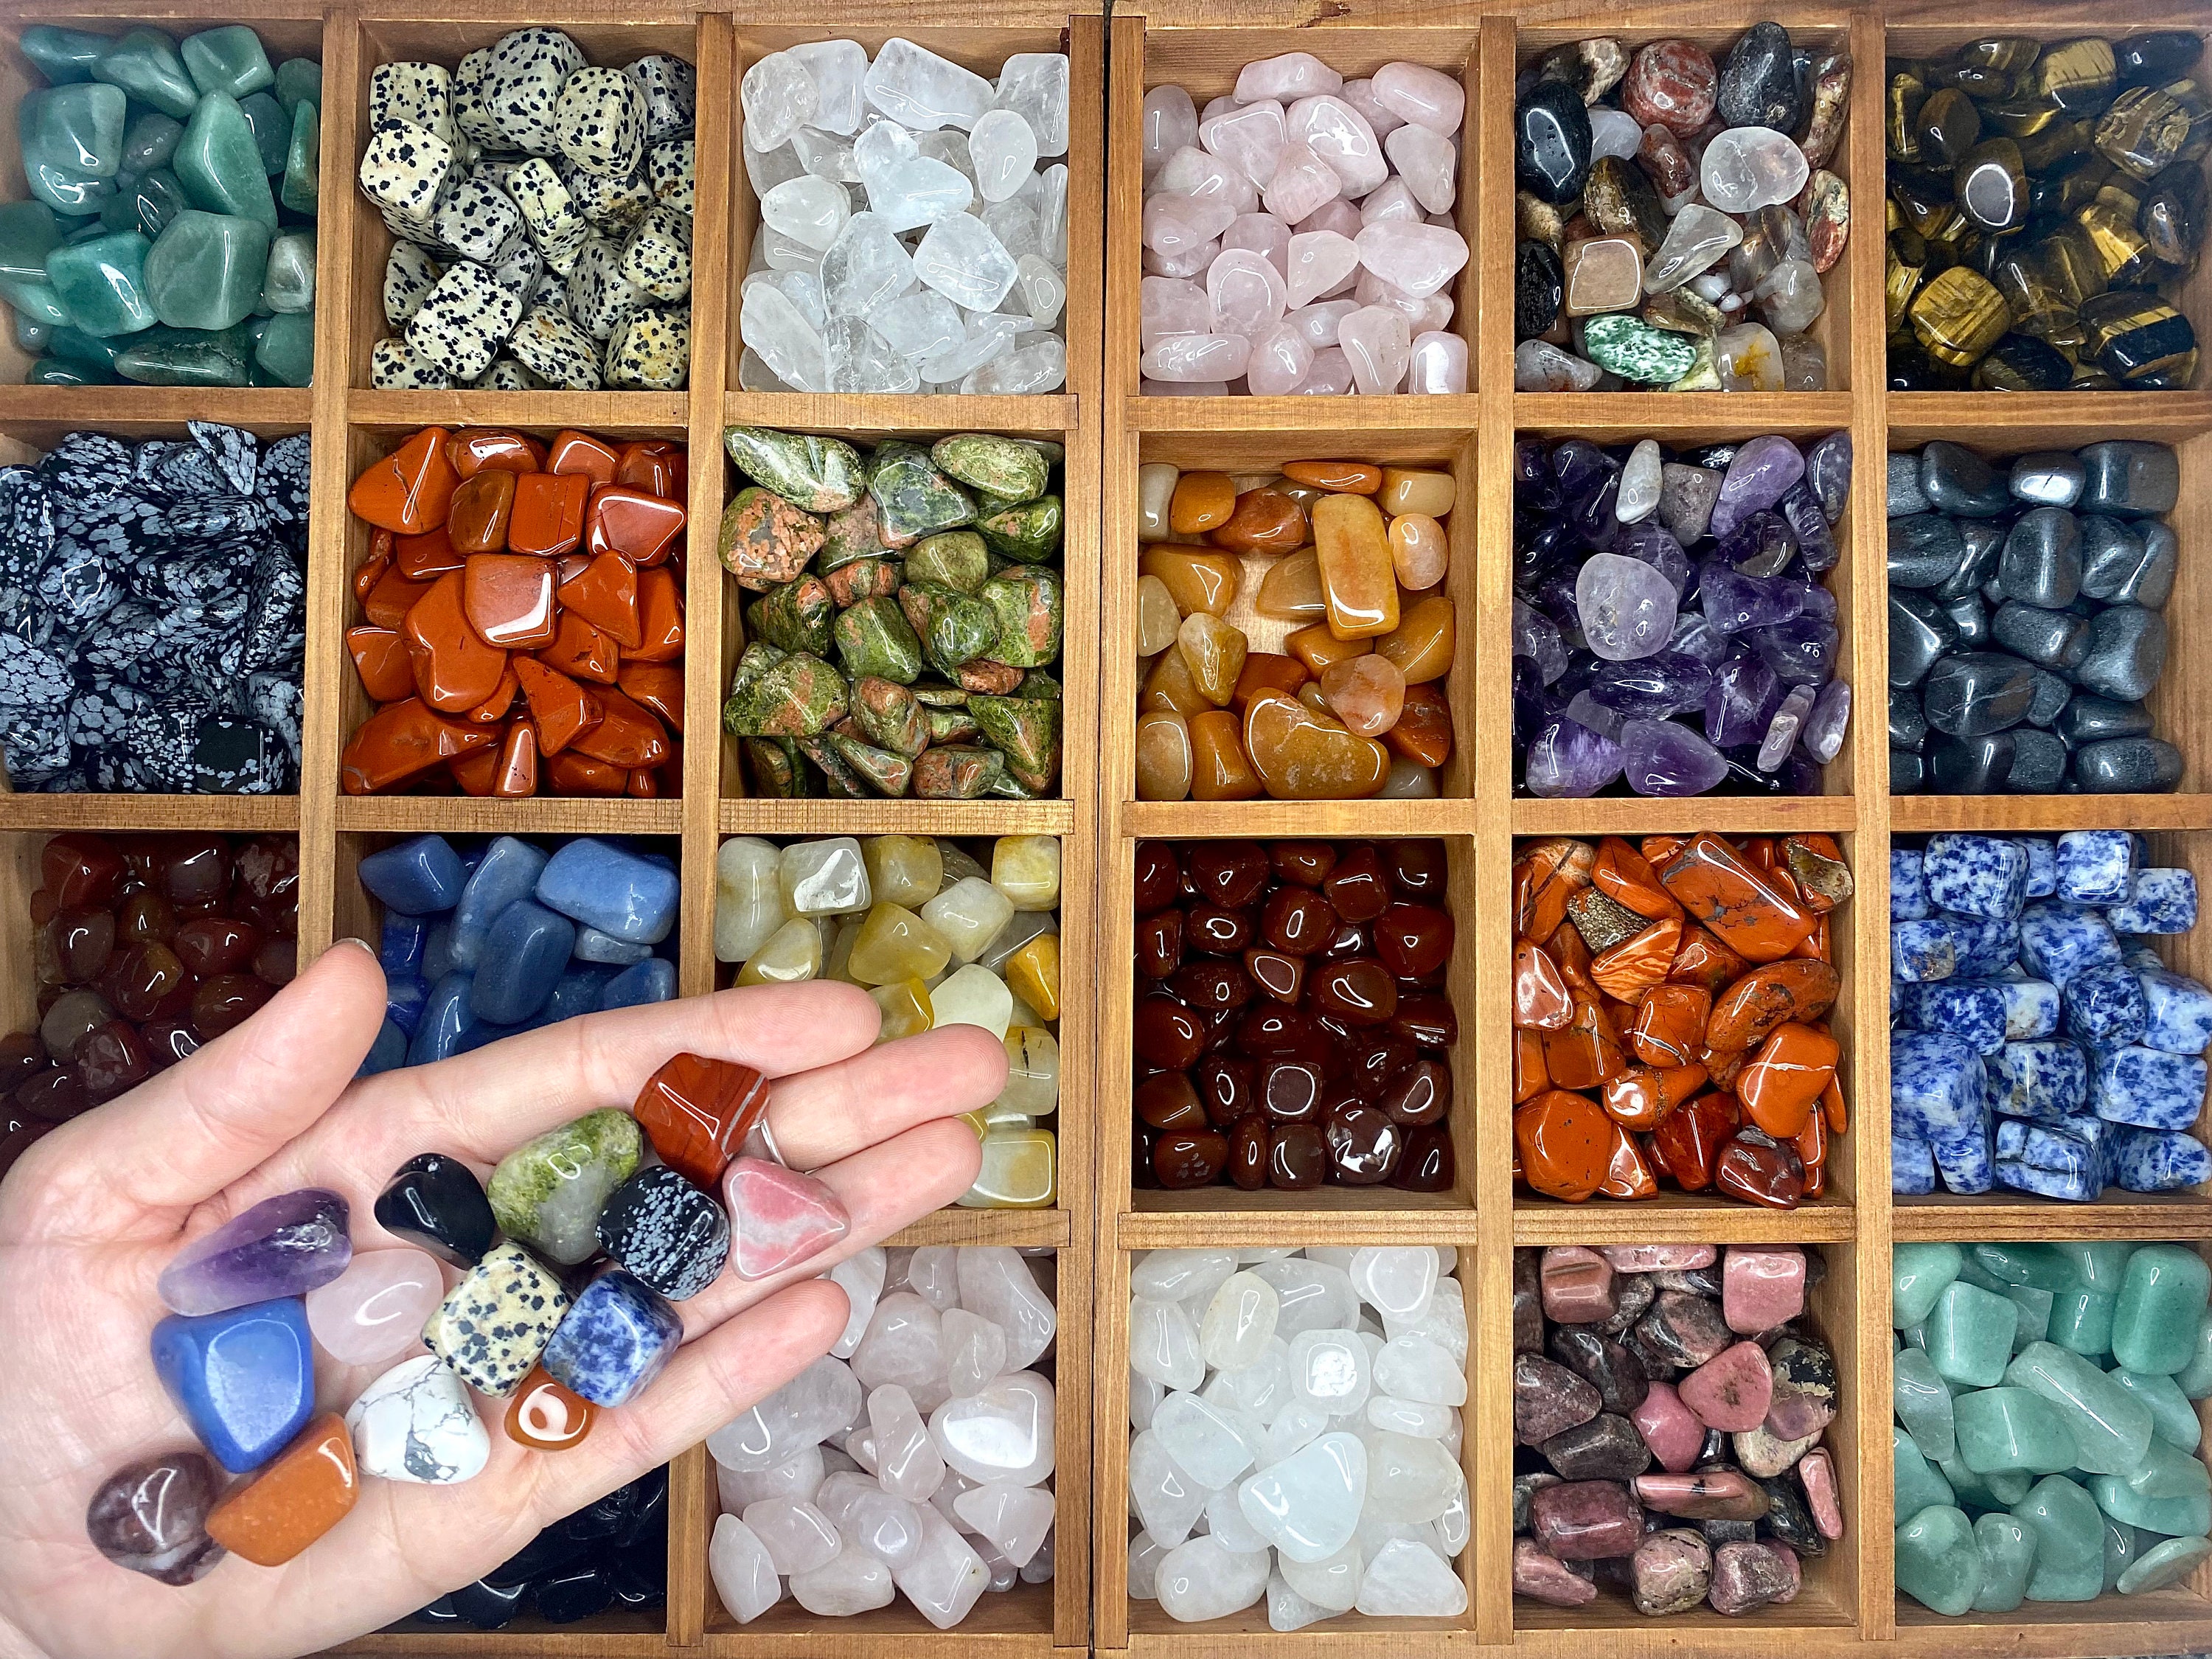 Polished Stones and Crystals Colorful Mix of Small Rocks and Flat Slices  8oz Lot